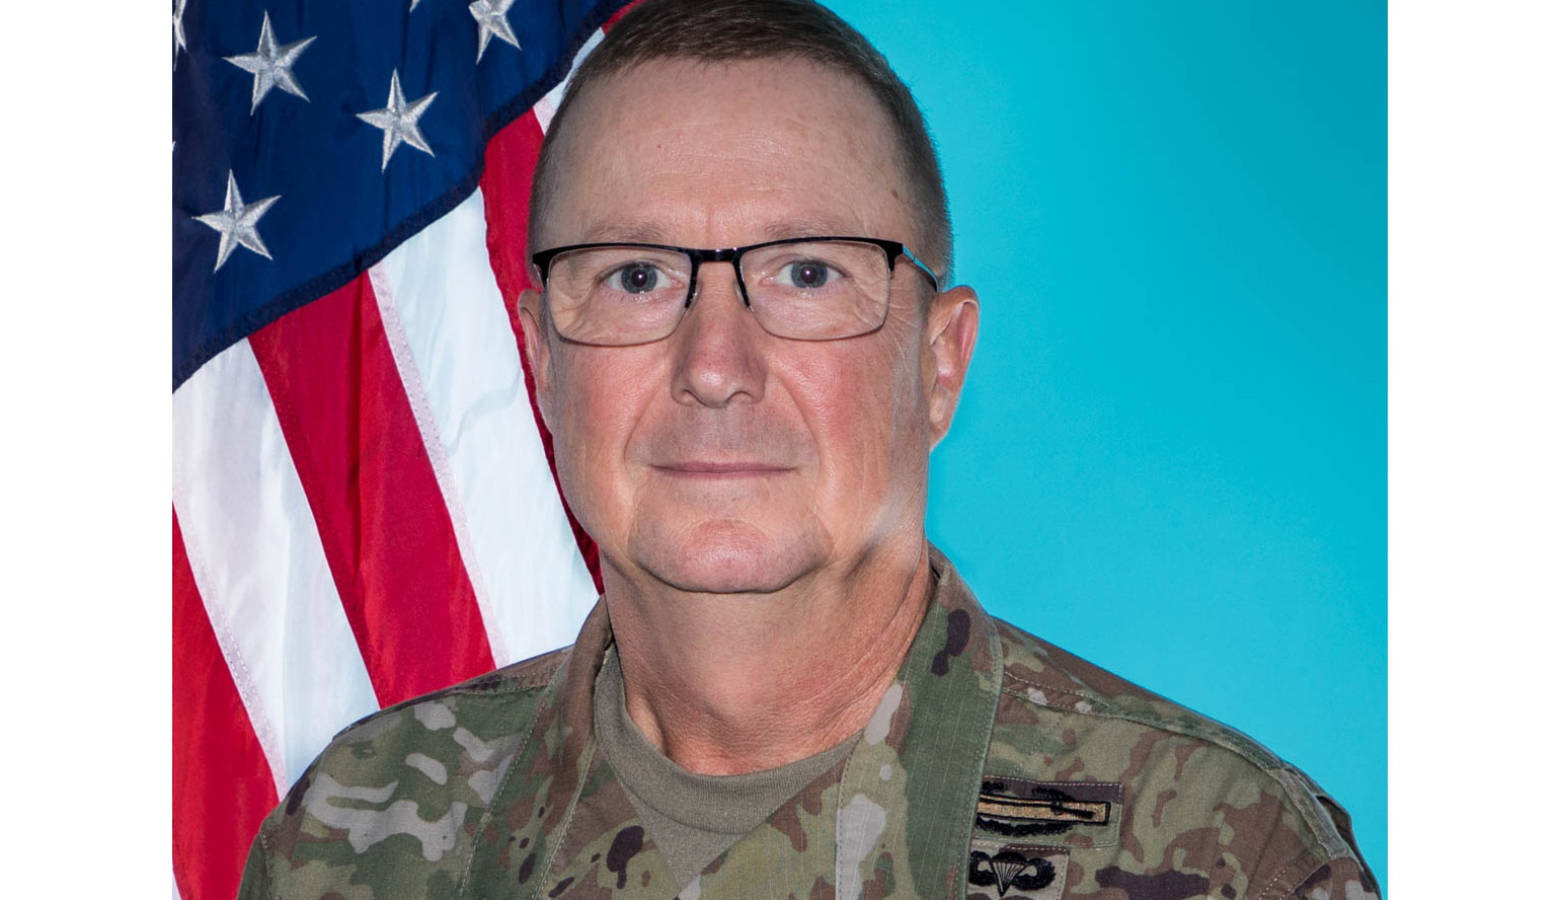 Col. R. Dale Lyles was named the new adjutant general of the Indiana National Guard. (Provided by the Governor's Office)